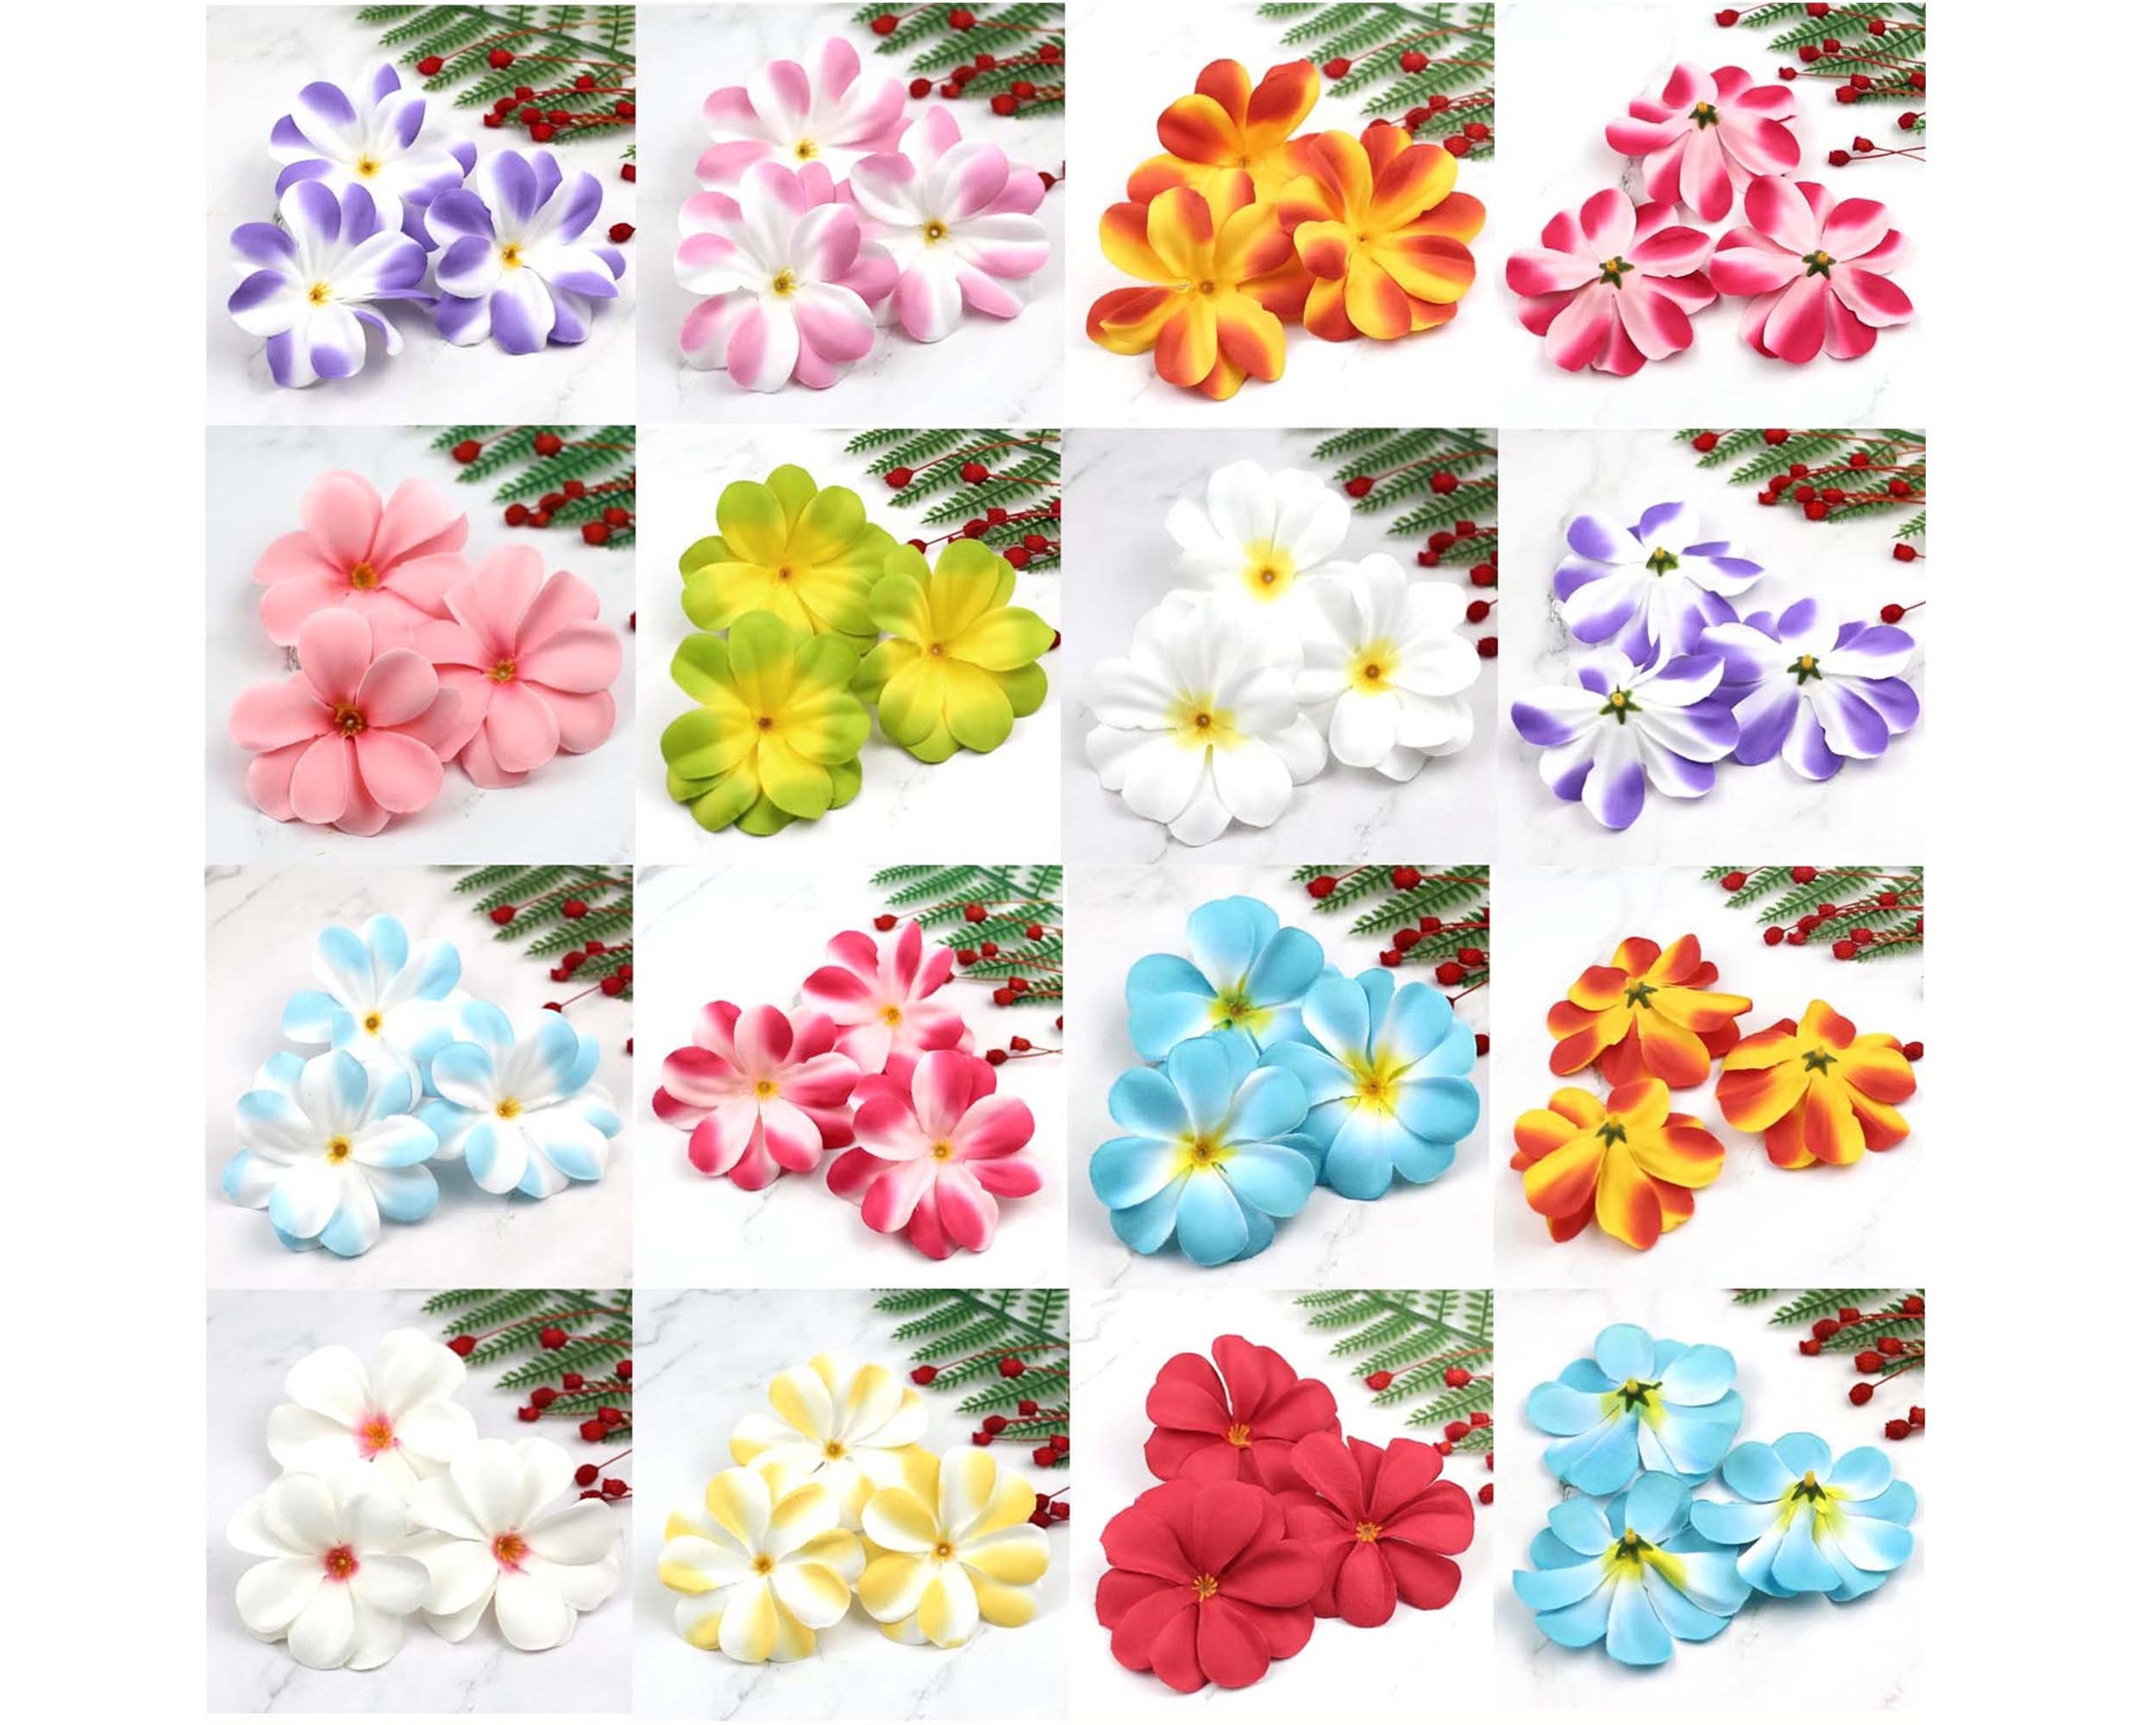 Pressed Flower Stickers, Realistic Floral Embellishment for Herbarium, MiniatureSweet, Kawaii Resin Crafts, Decoden Cabochons Supplies